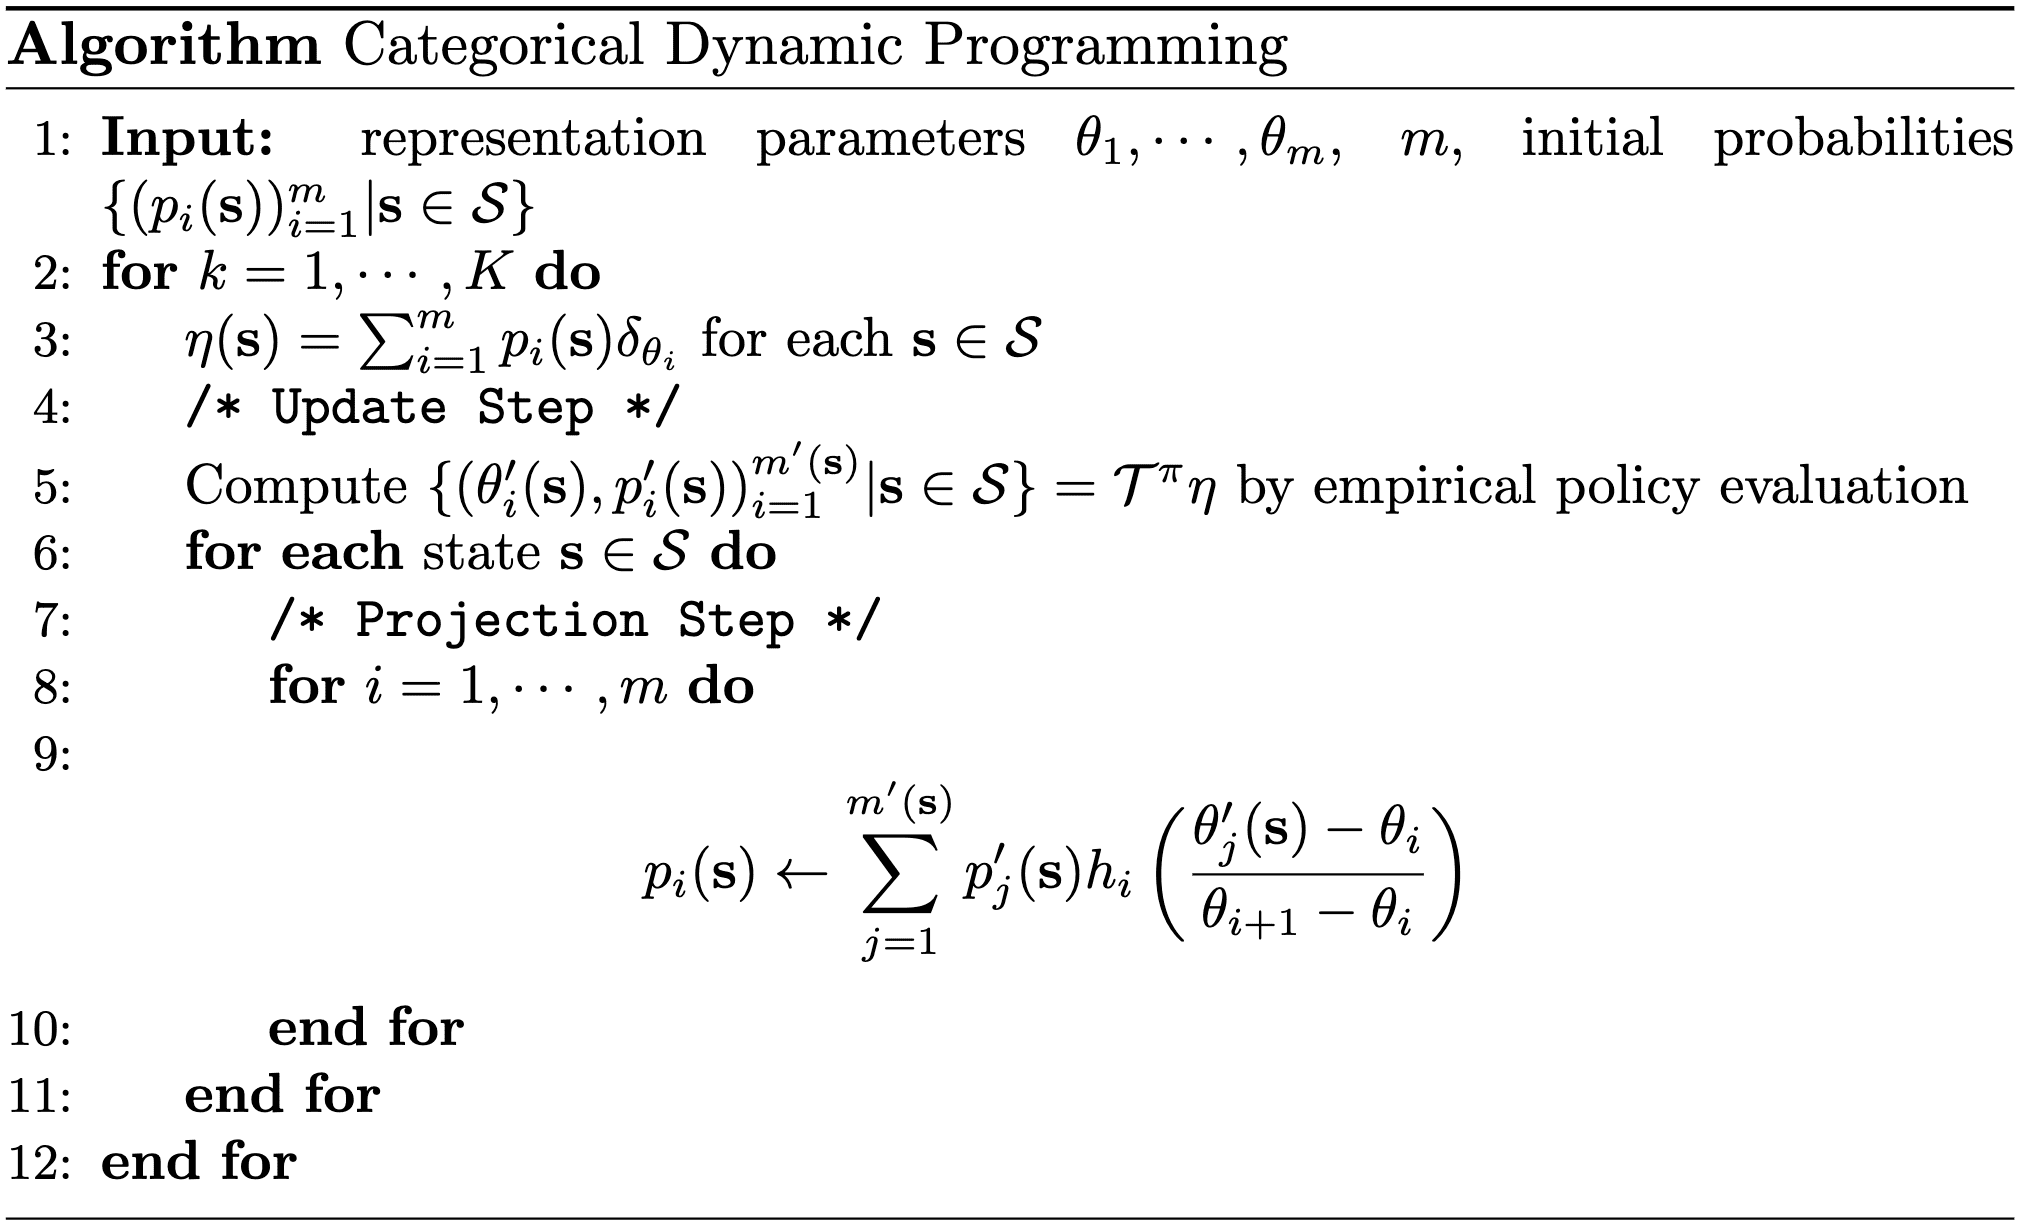 The pseudocode of Categorical Dynamic Programming